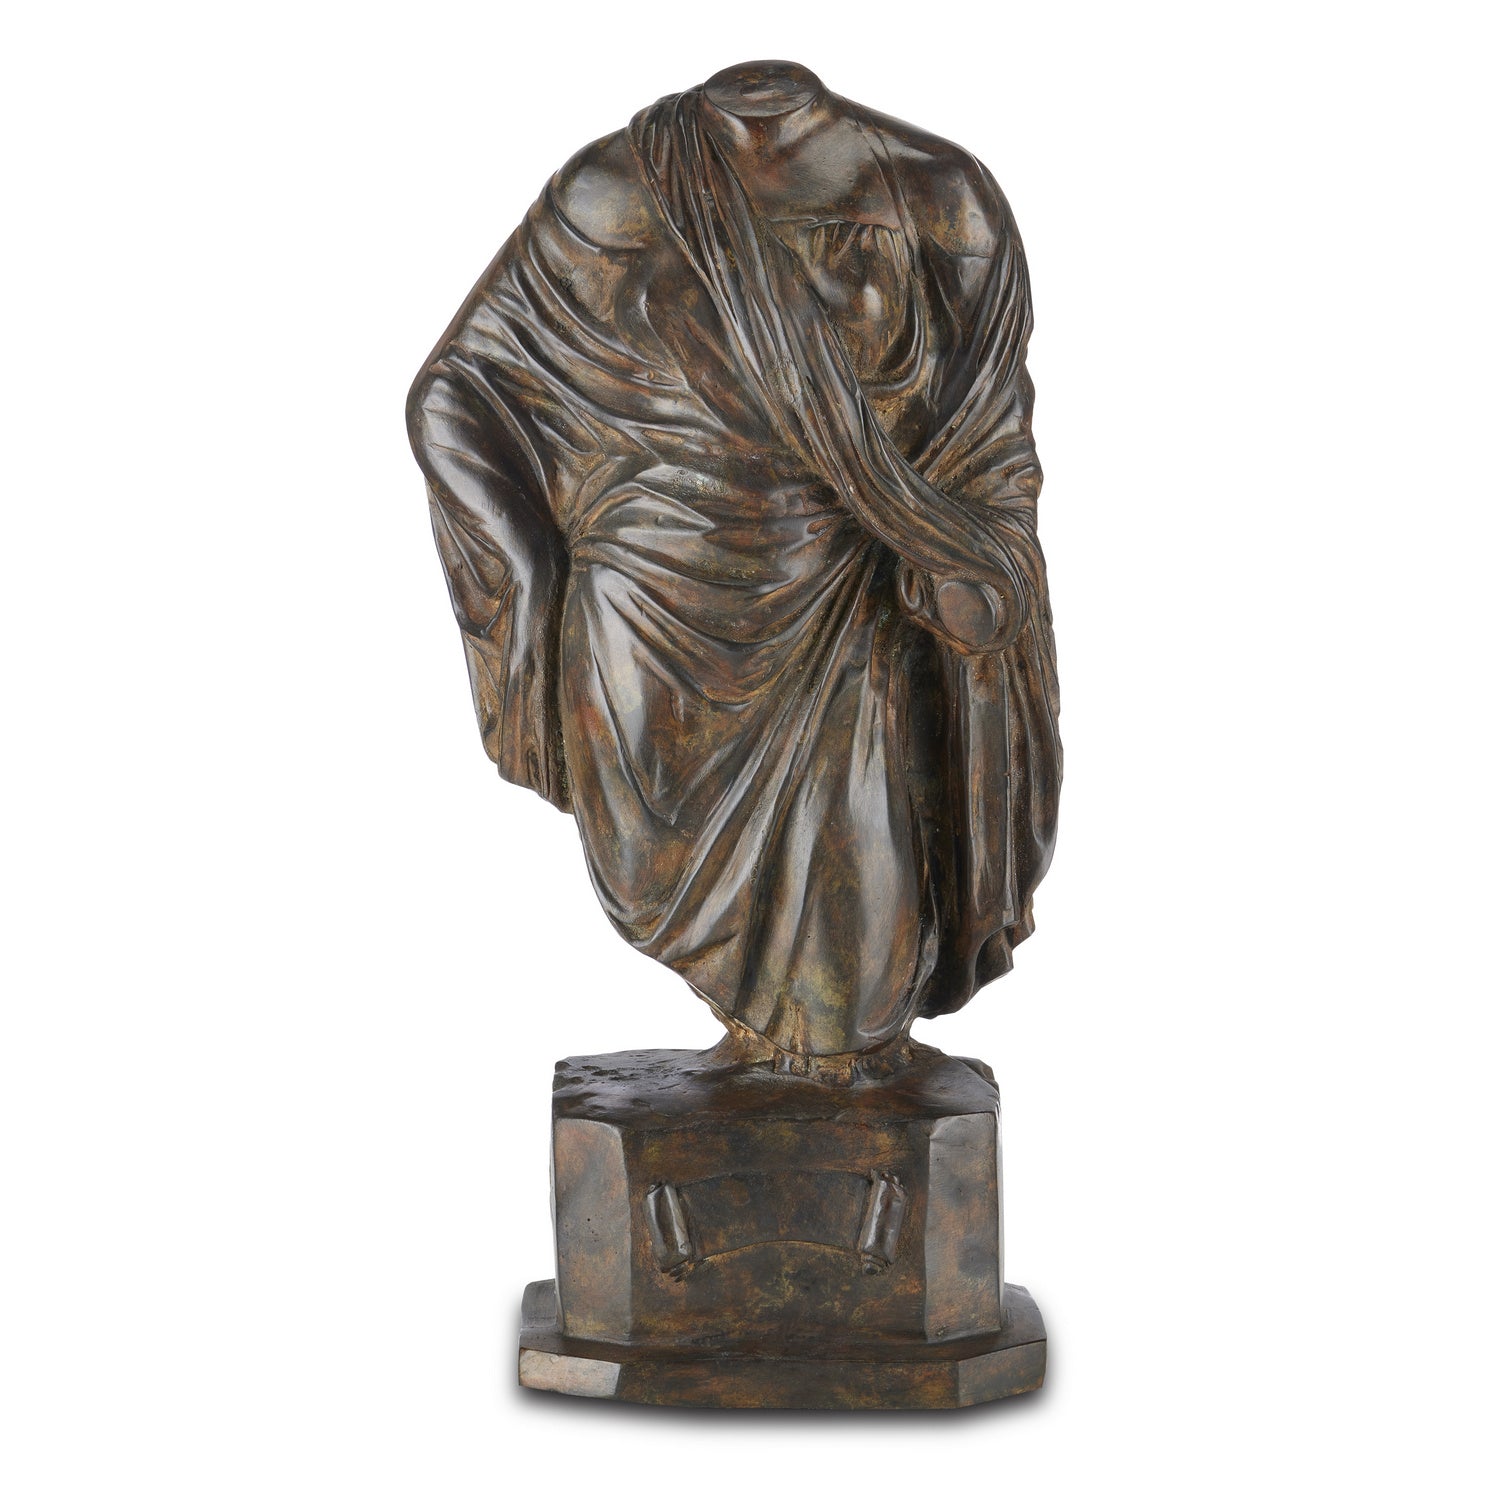 Currey and Company - 1200-0599 - Object - Greek Female - Antique Bronze